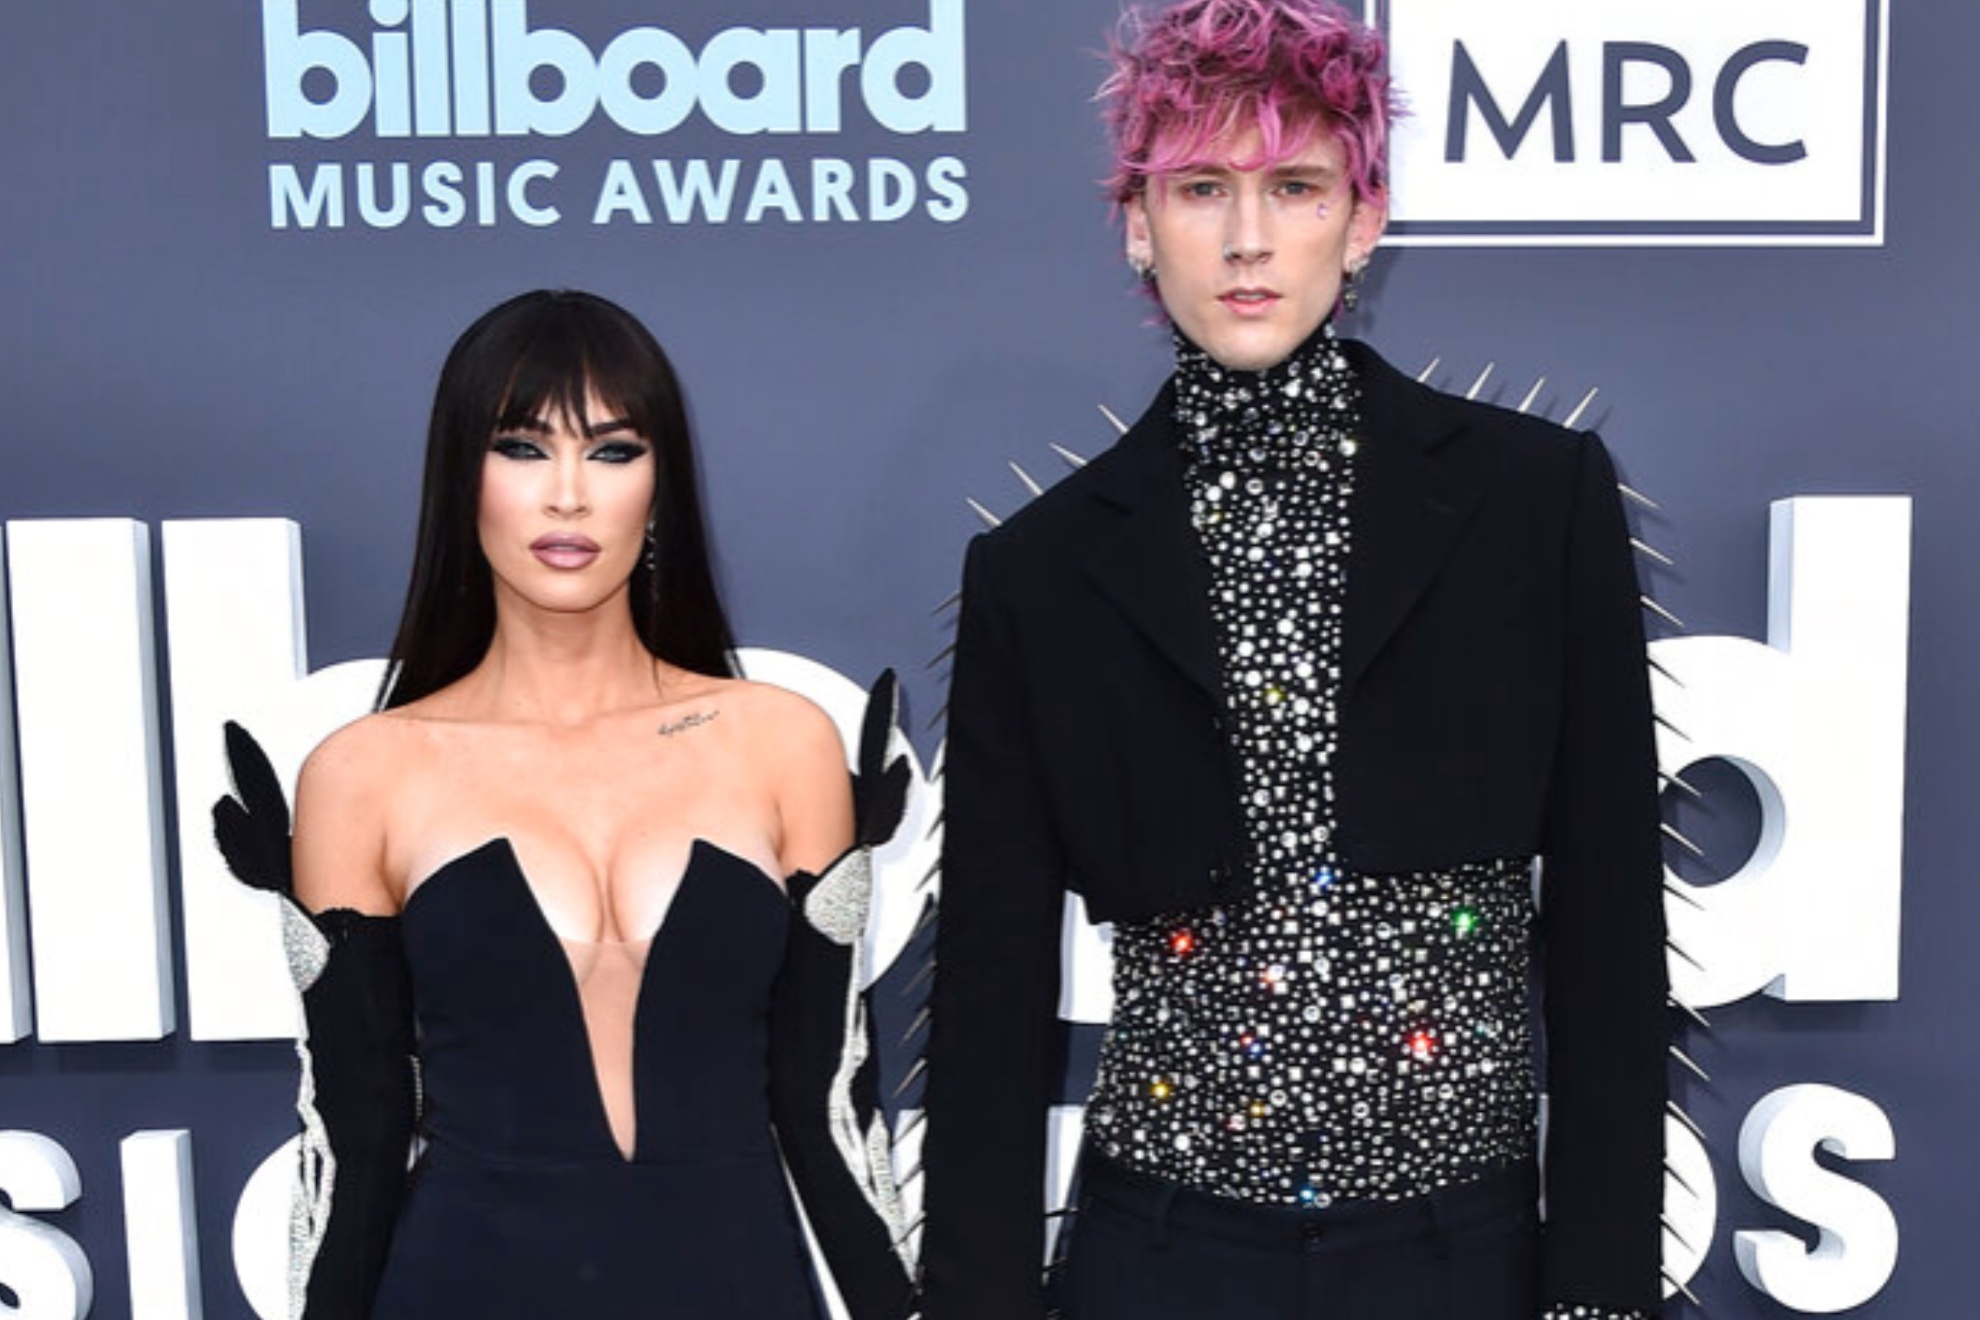 Megan Fox and Machine Gun Kelly started their relationship in 2020